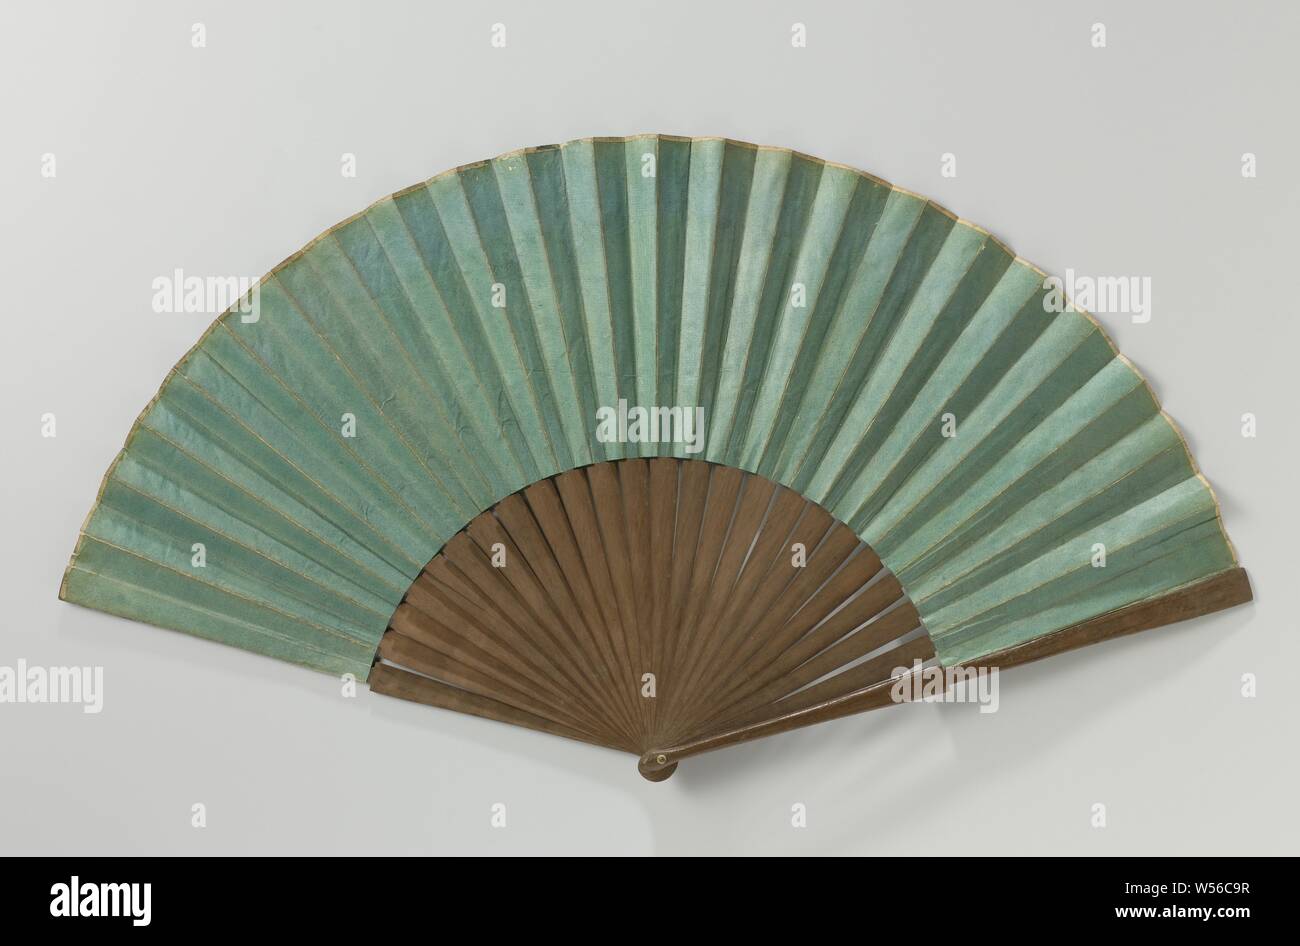 Folding fan with double leaf of green painted paper on an unadorned wooden frame, Folding fan with double leaf of green painted paper on an unadorned wooden frame. 24 contiguous legs. In addition to this specimen, the Van Eeghen collection (now at the KOG) contains a number of these simple fans with a sheet of plain green paper. Although several specimens have been preserved and it could be deduced from this that these impellers were used fairly generally, to date, virtually nothing is known about their origin or use. Only one mention of this specific type of impellers is known and can be Stock Photo